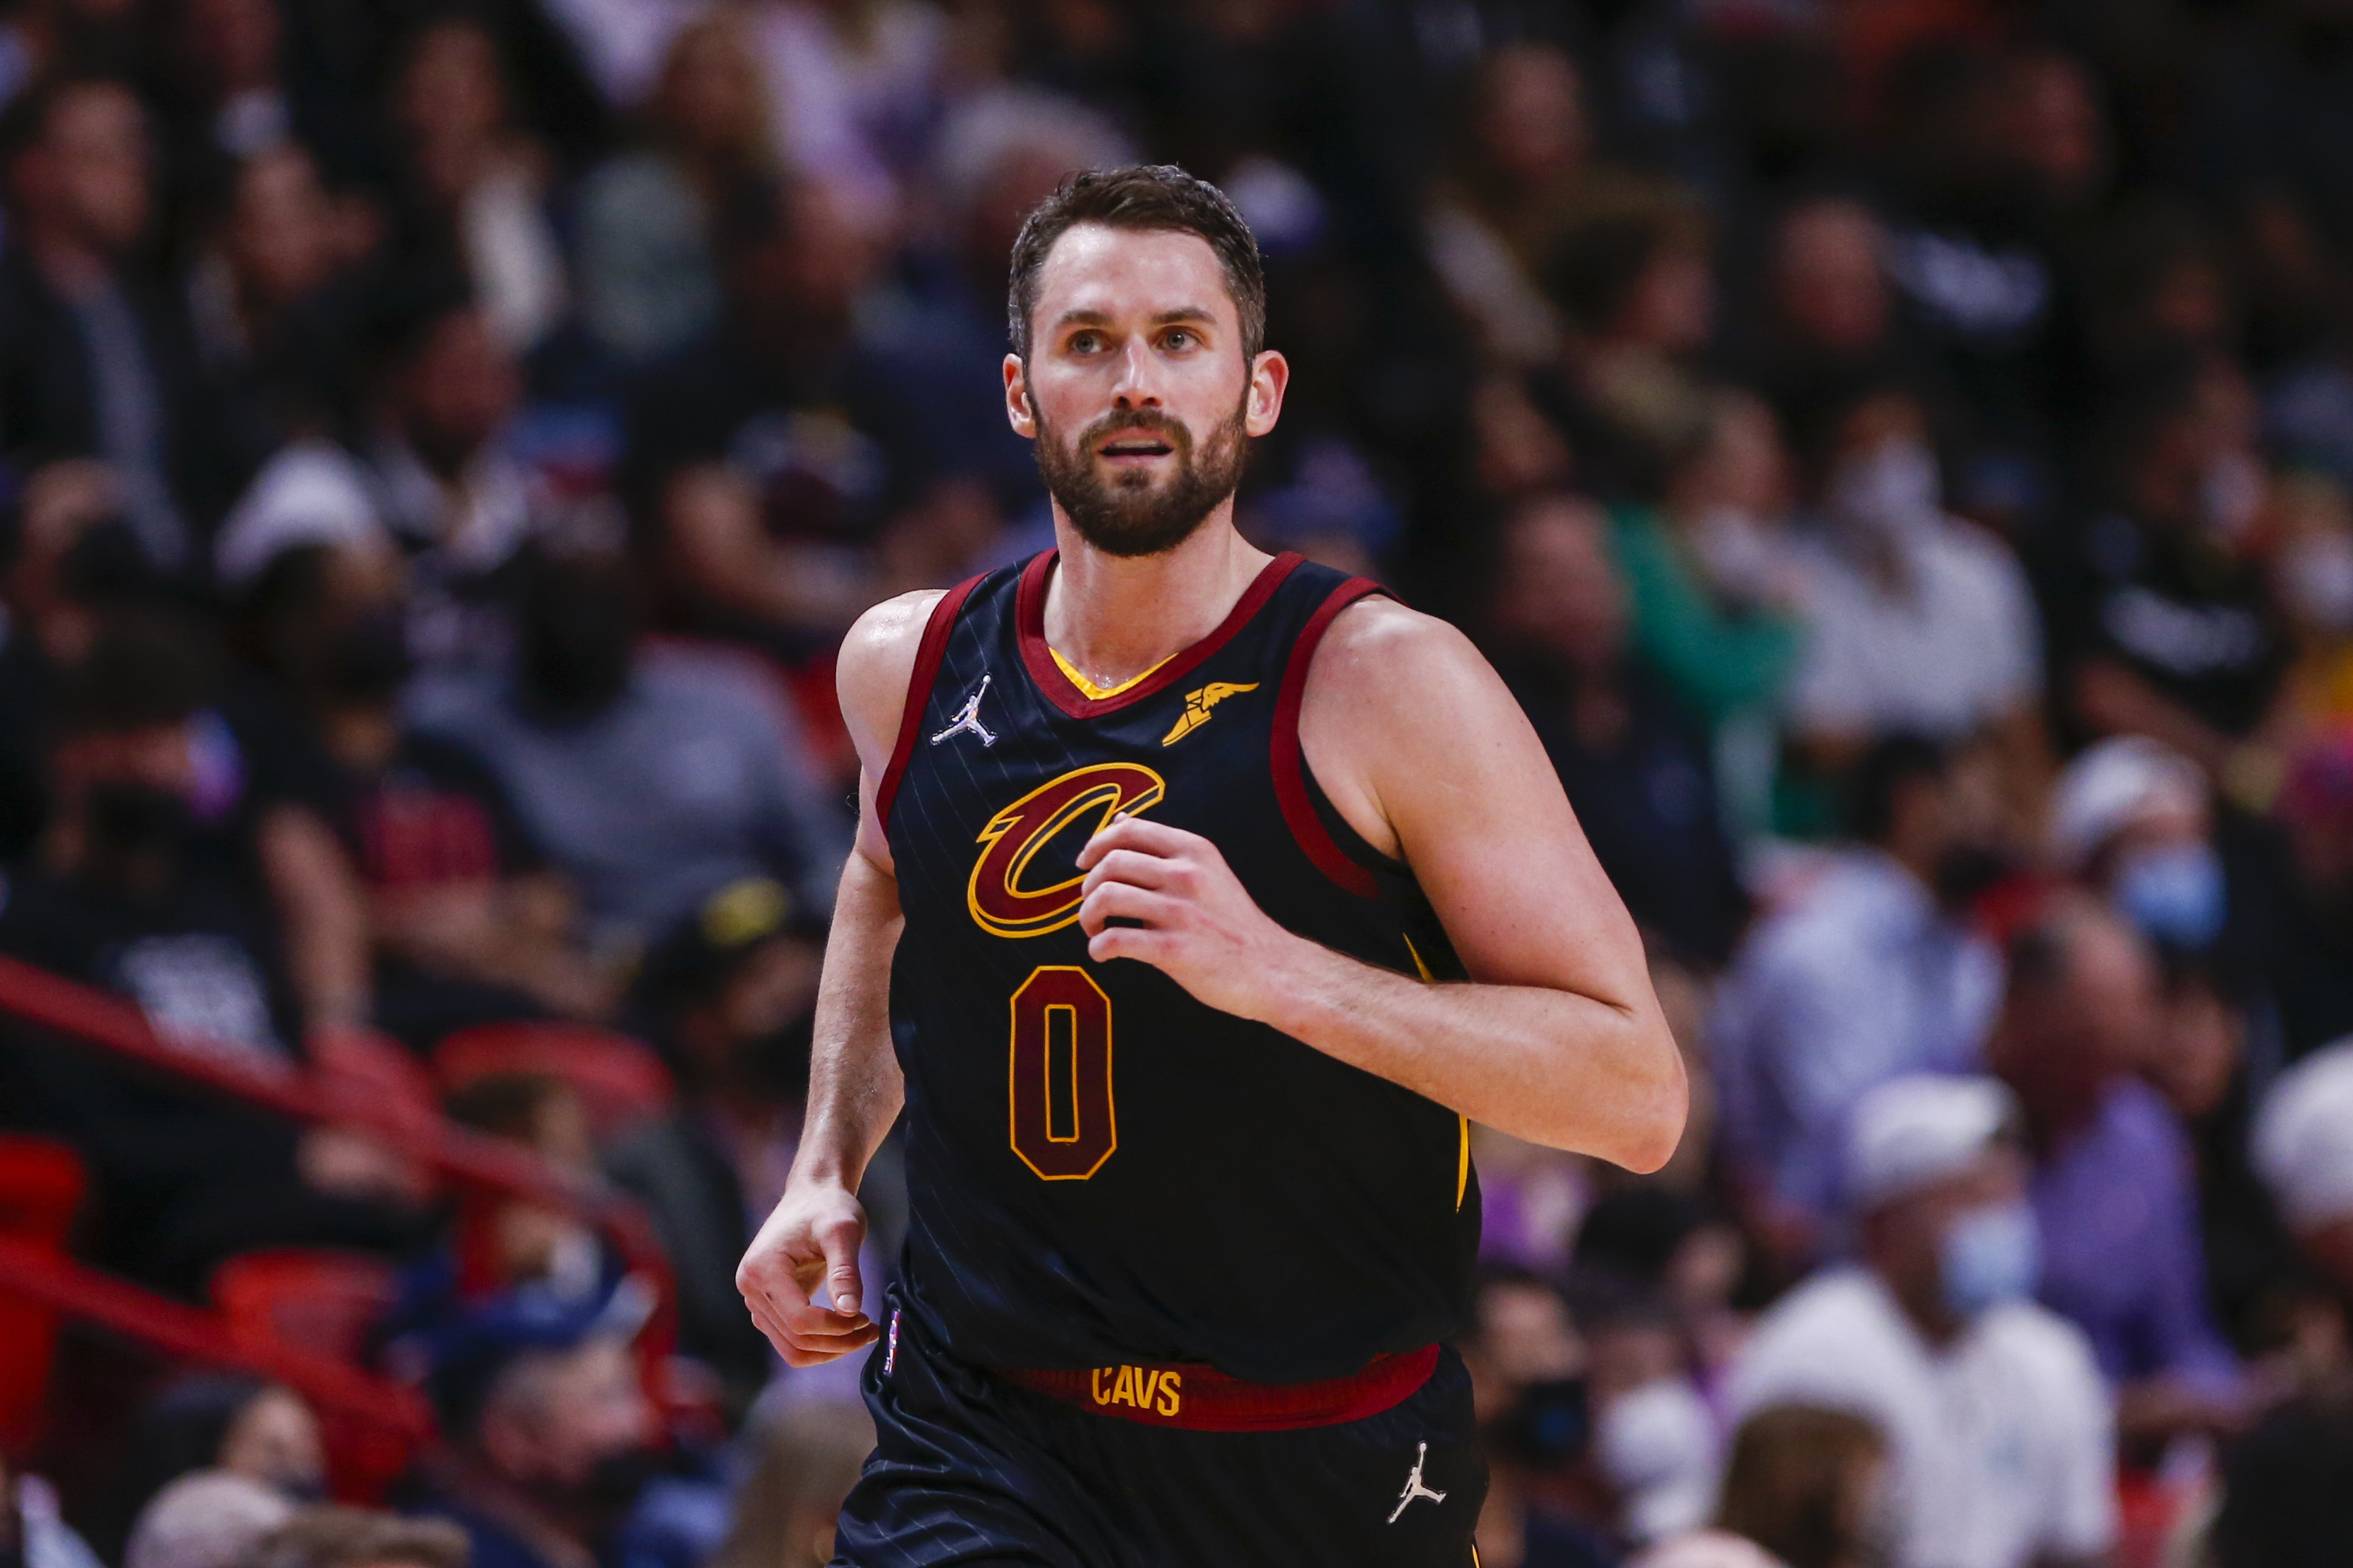 Dec 1, 2021; Miami, Florida, USA; Cleveland Cavaliers forward Kevin Love (0) runs down the court after scoring against the Miami Heat during the fourth quarter at FTX Arena. Mandatory Credit: Sam Navarro-USA TODAY Sports